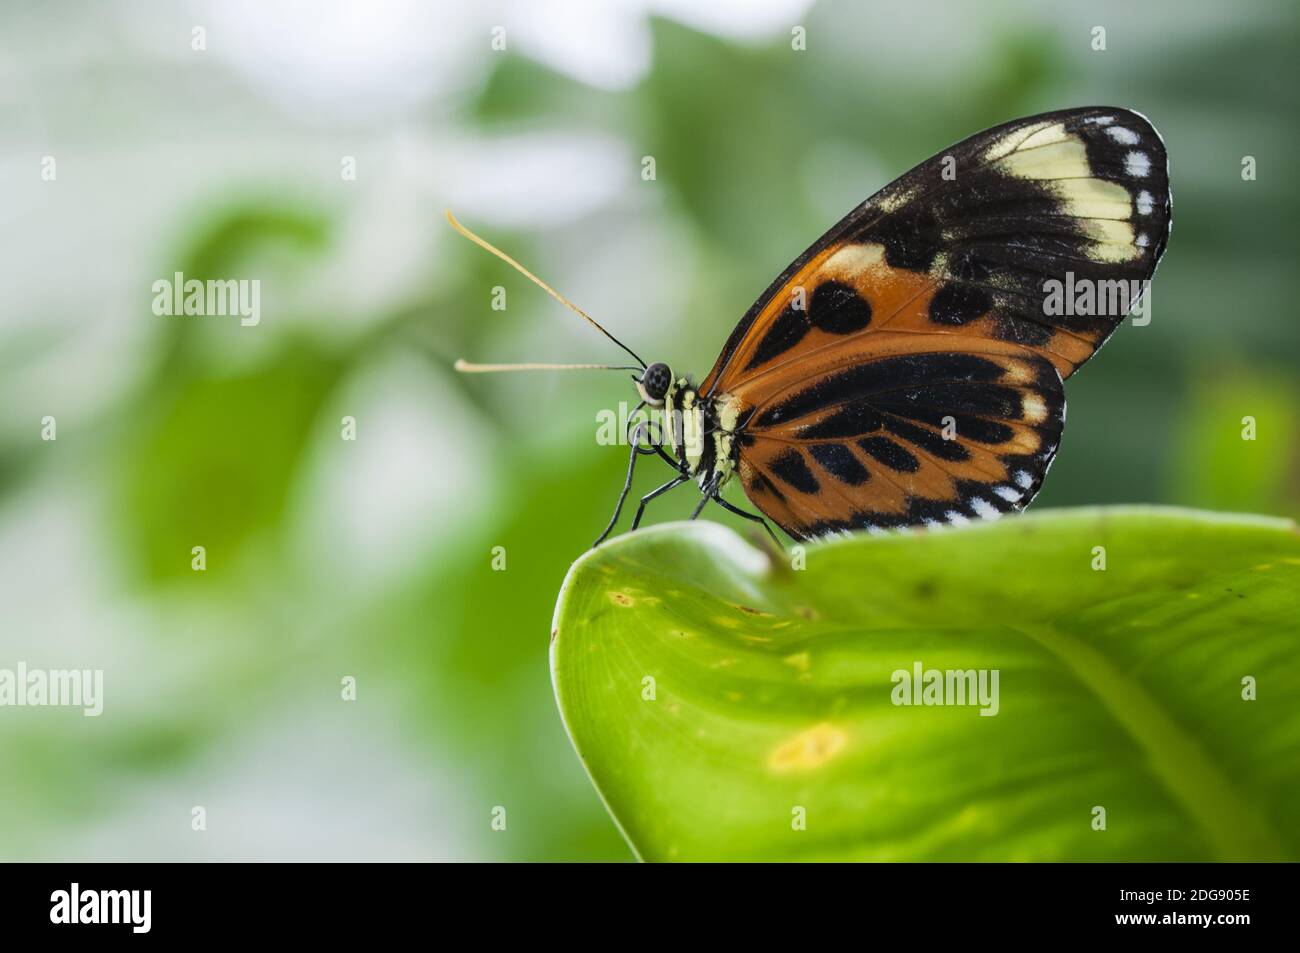 Butterfly, lepidoptera, Passion butterfly, Heliconius, sitting on a leaf. Stock Photo